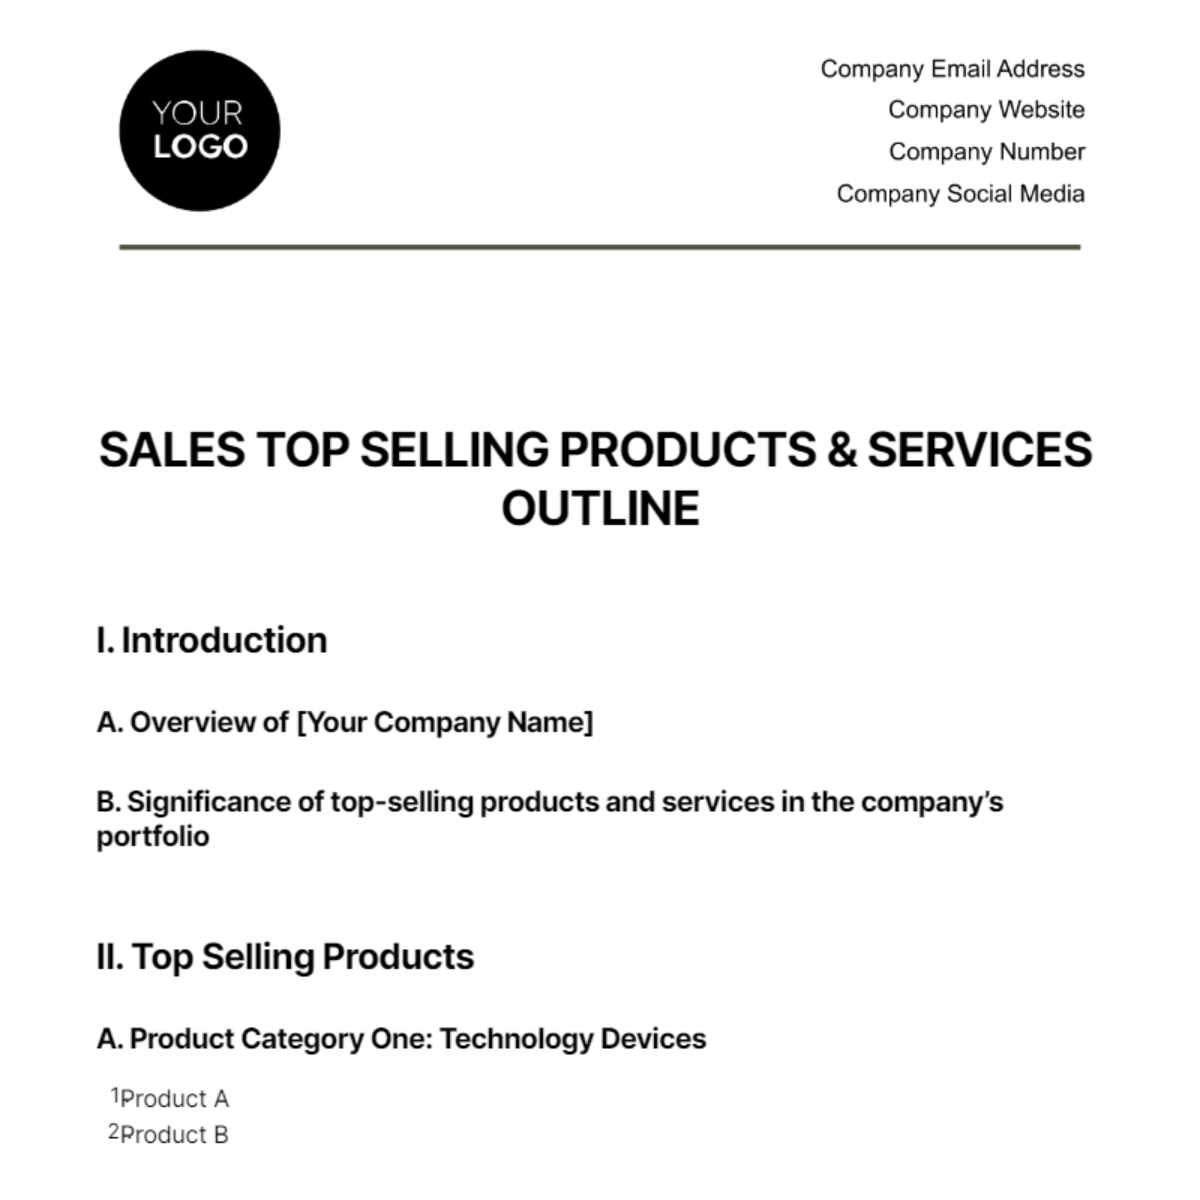 Free Sales Top Selling Products & Services Outline Template